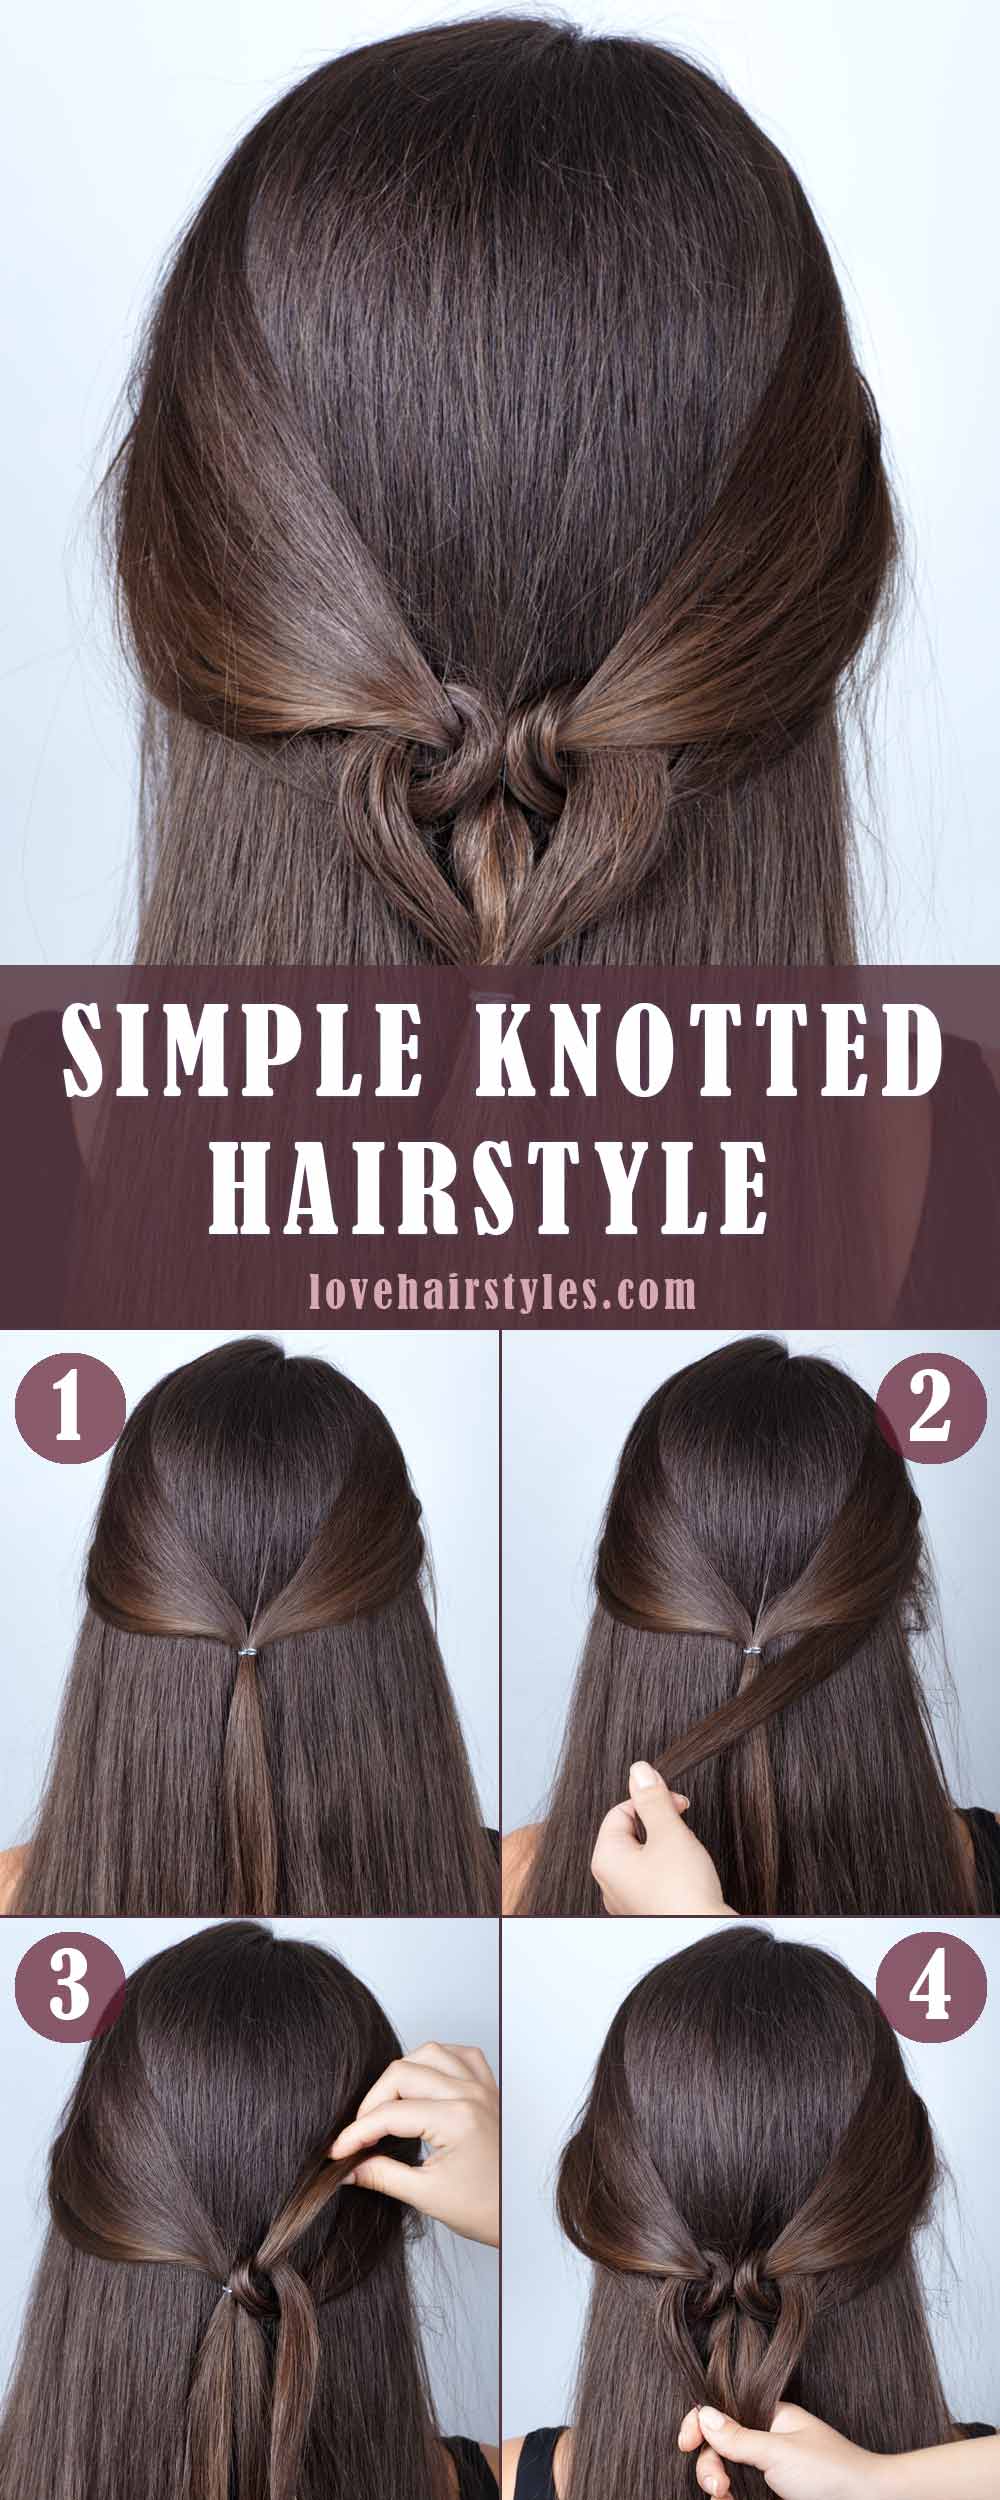 Simple Knotted Hairstyle For Medium Hair